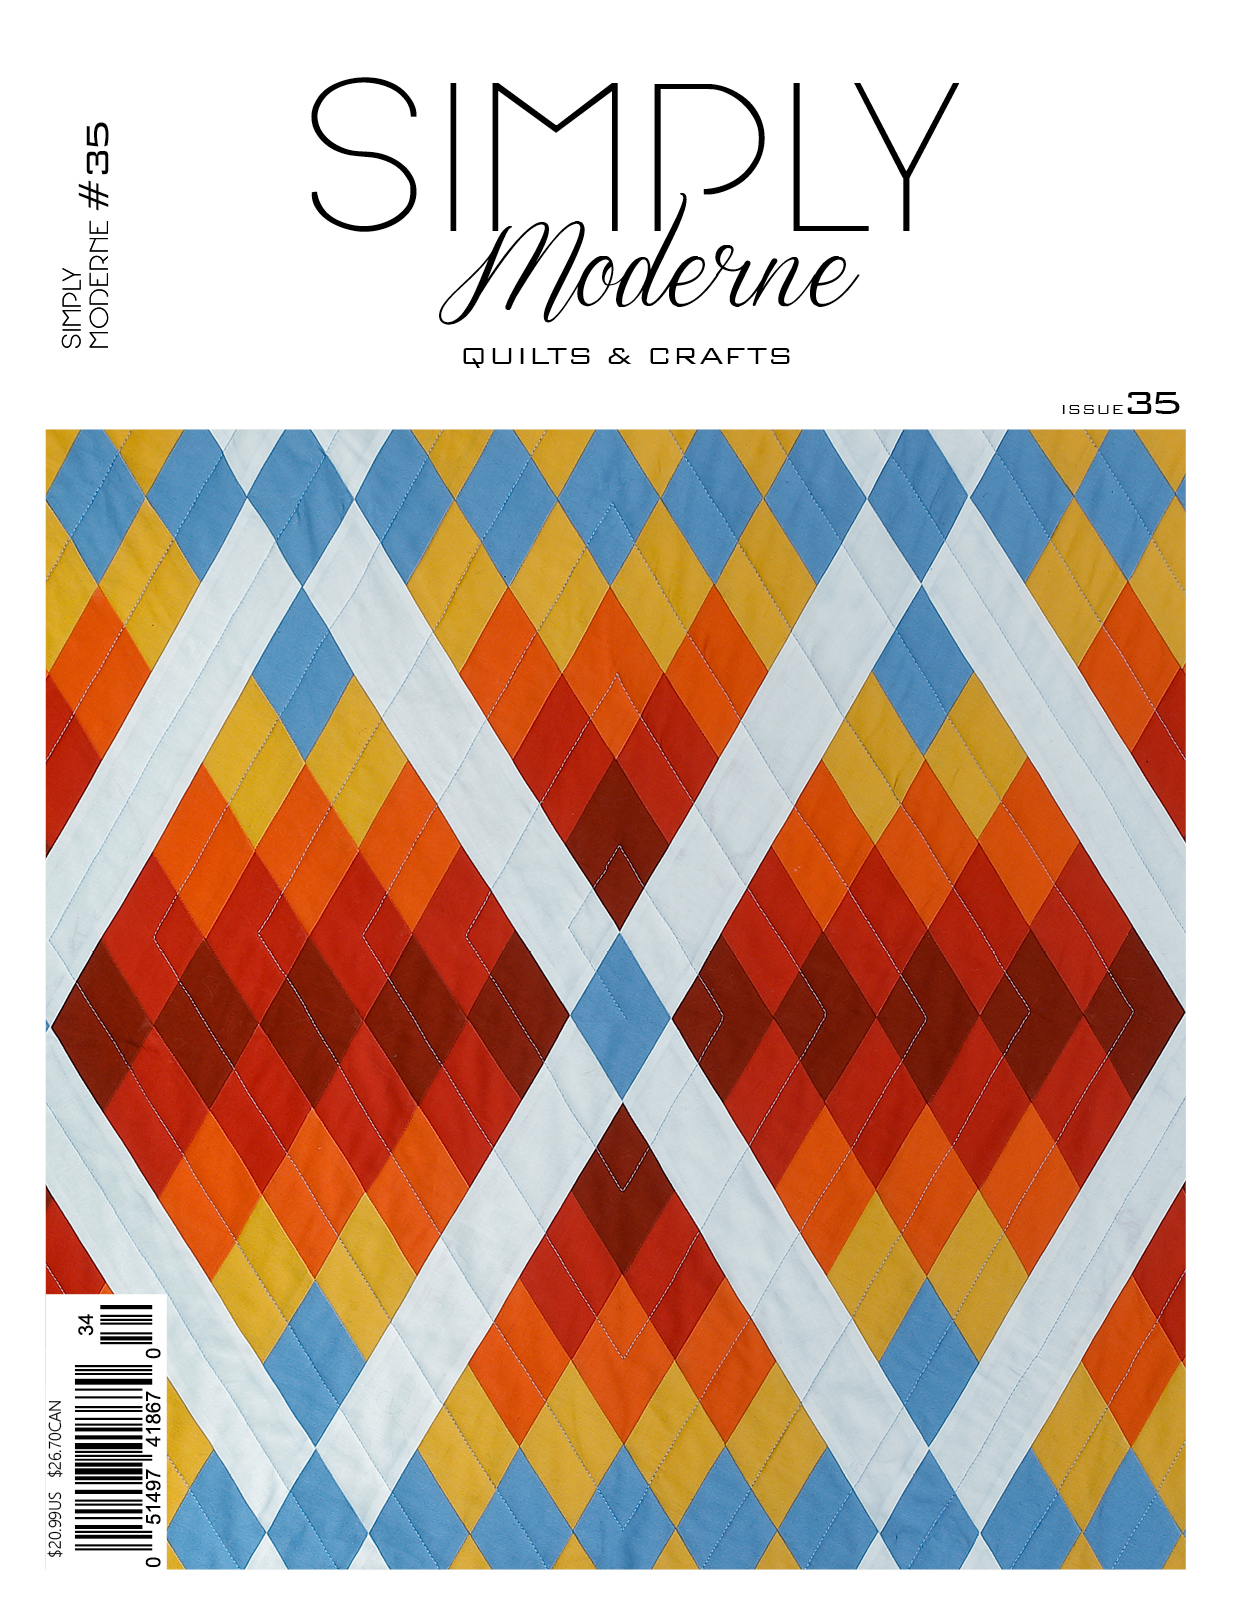 Simply Moderne  Modern Quilting Magazine - Quiltmania Inc.